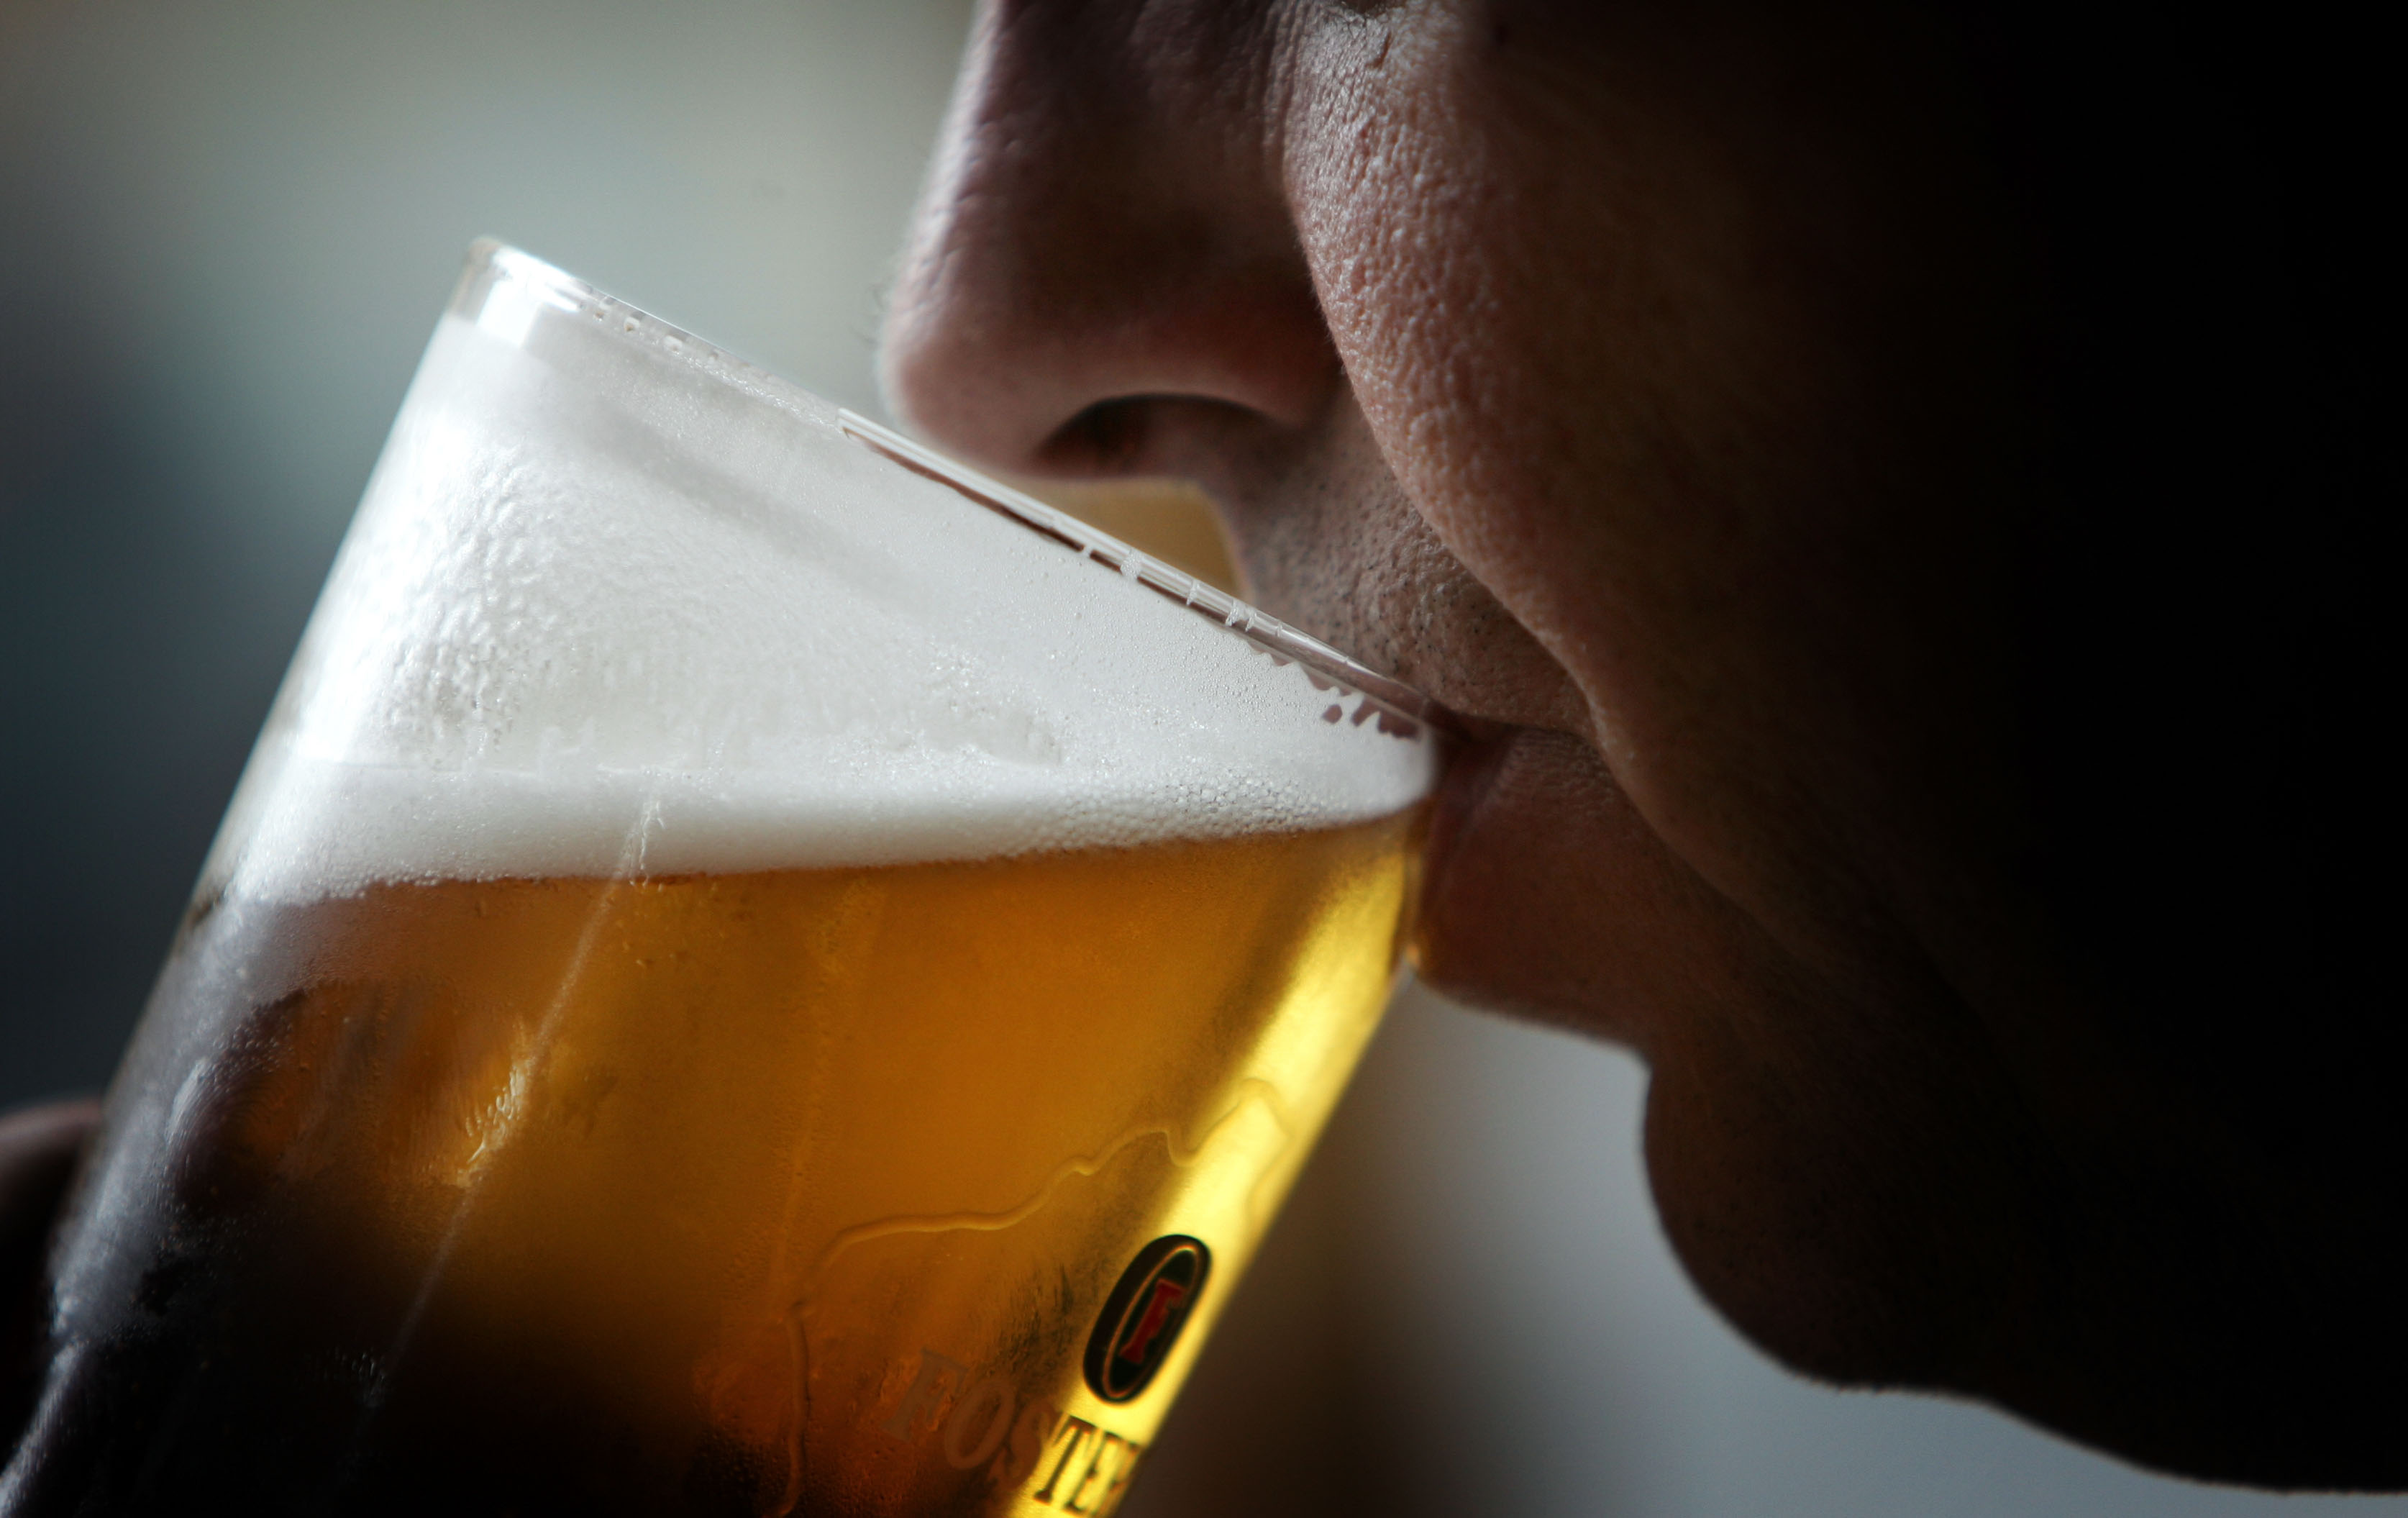 Prescribing antidepressants to treat alcohol use disorder can cause cravings: CMAJ